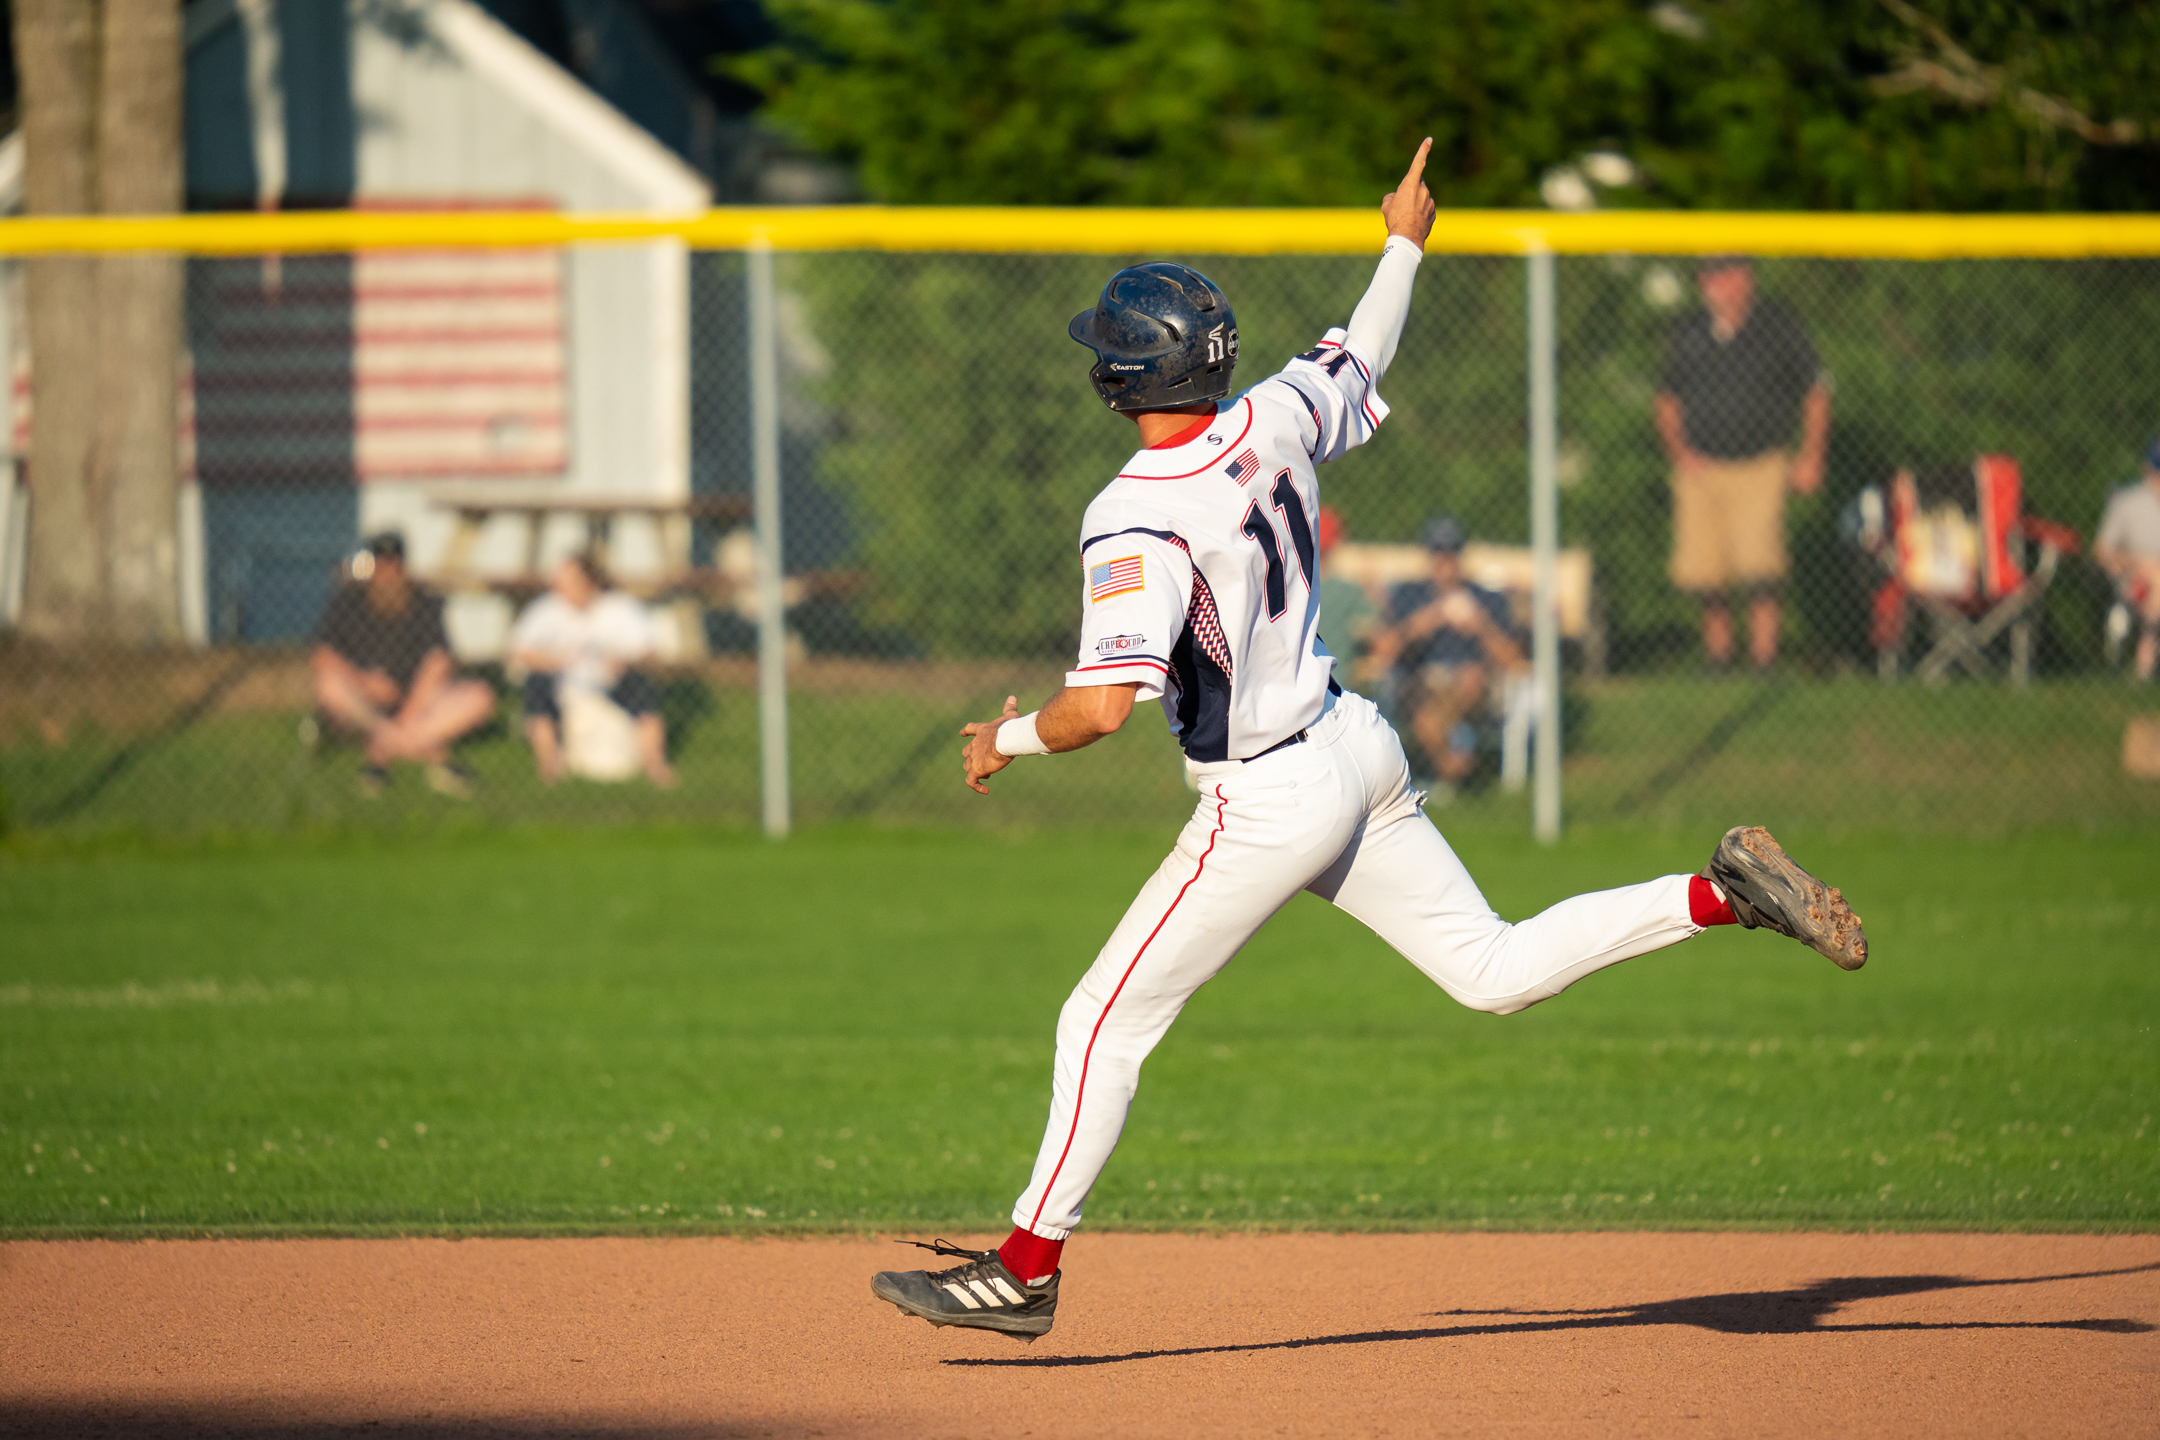 Y-D Pulls Out Gutsy Win to Advance to Eastern Division Finals - YARMOUTH